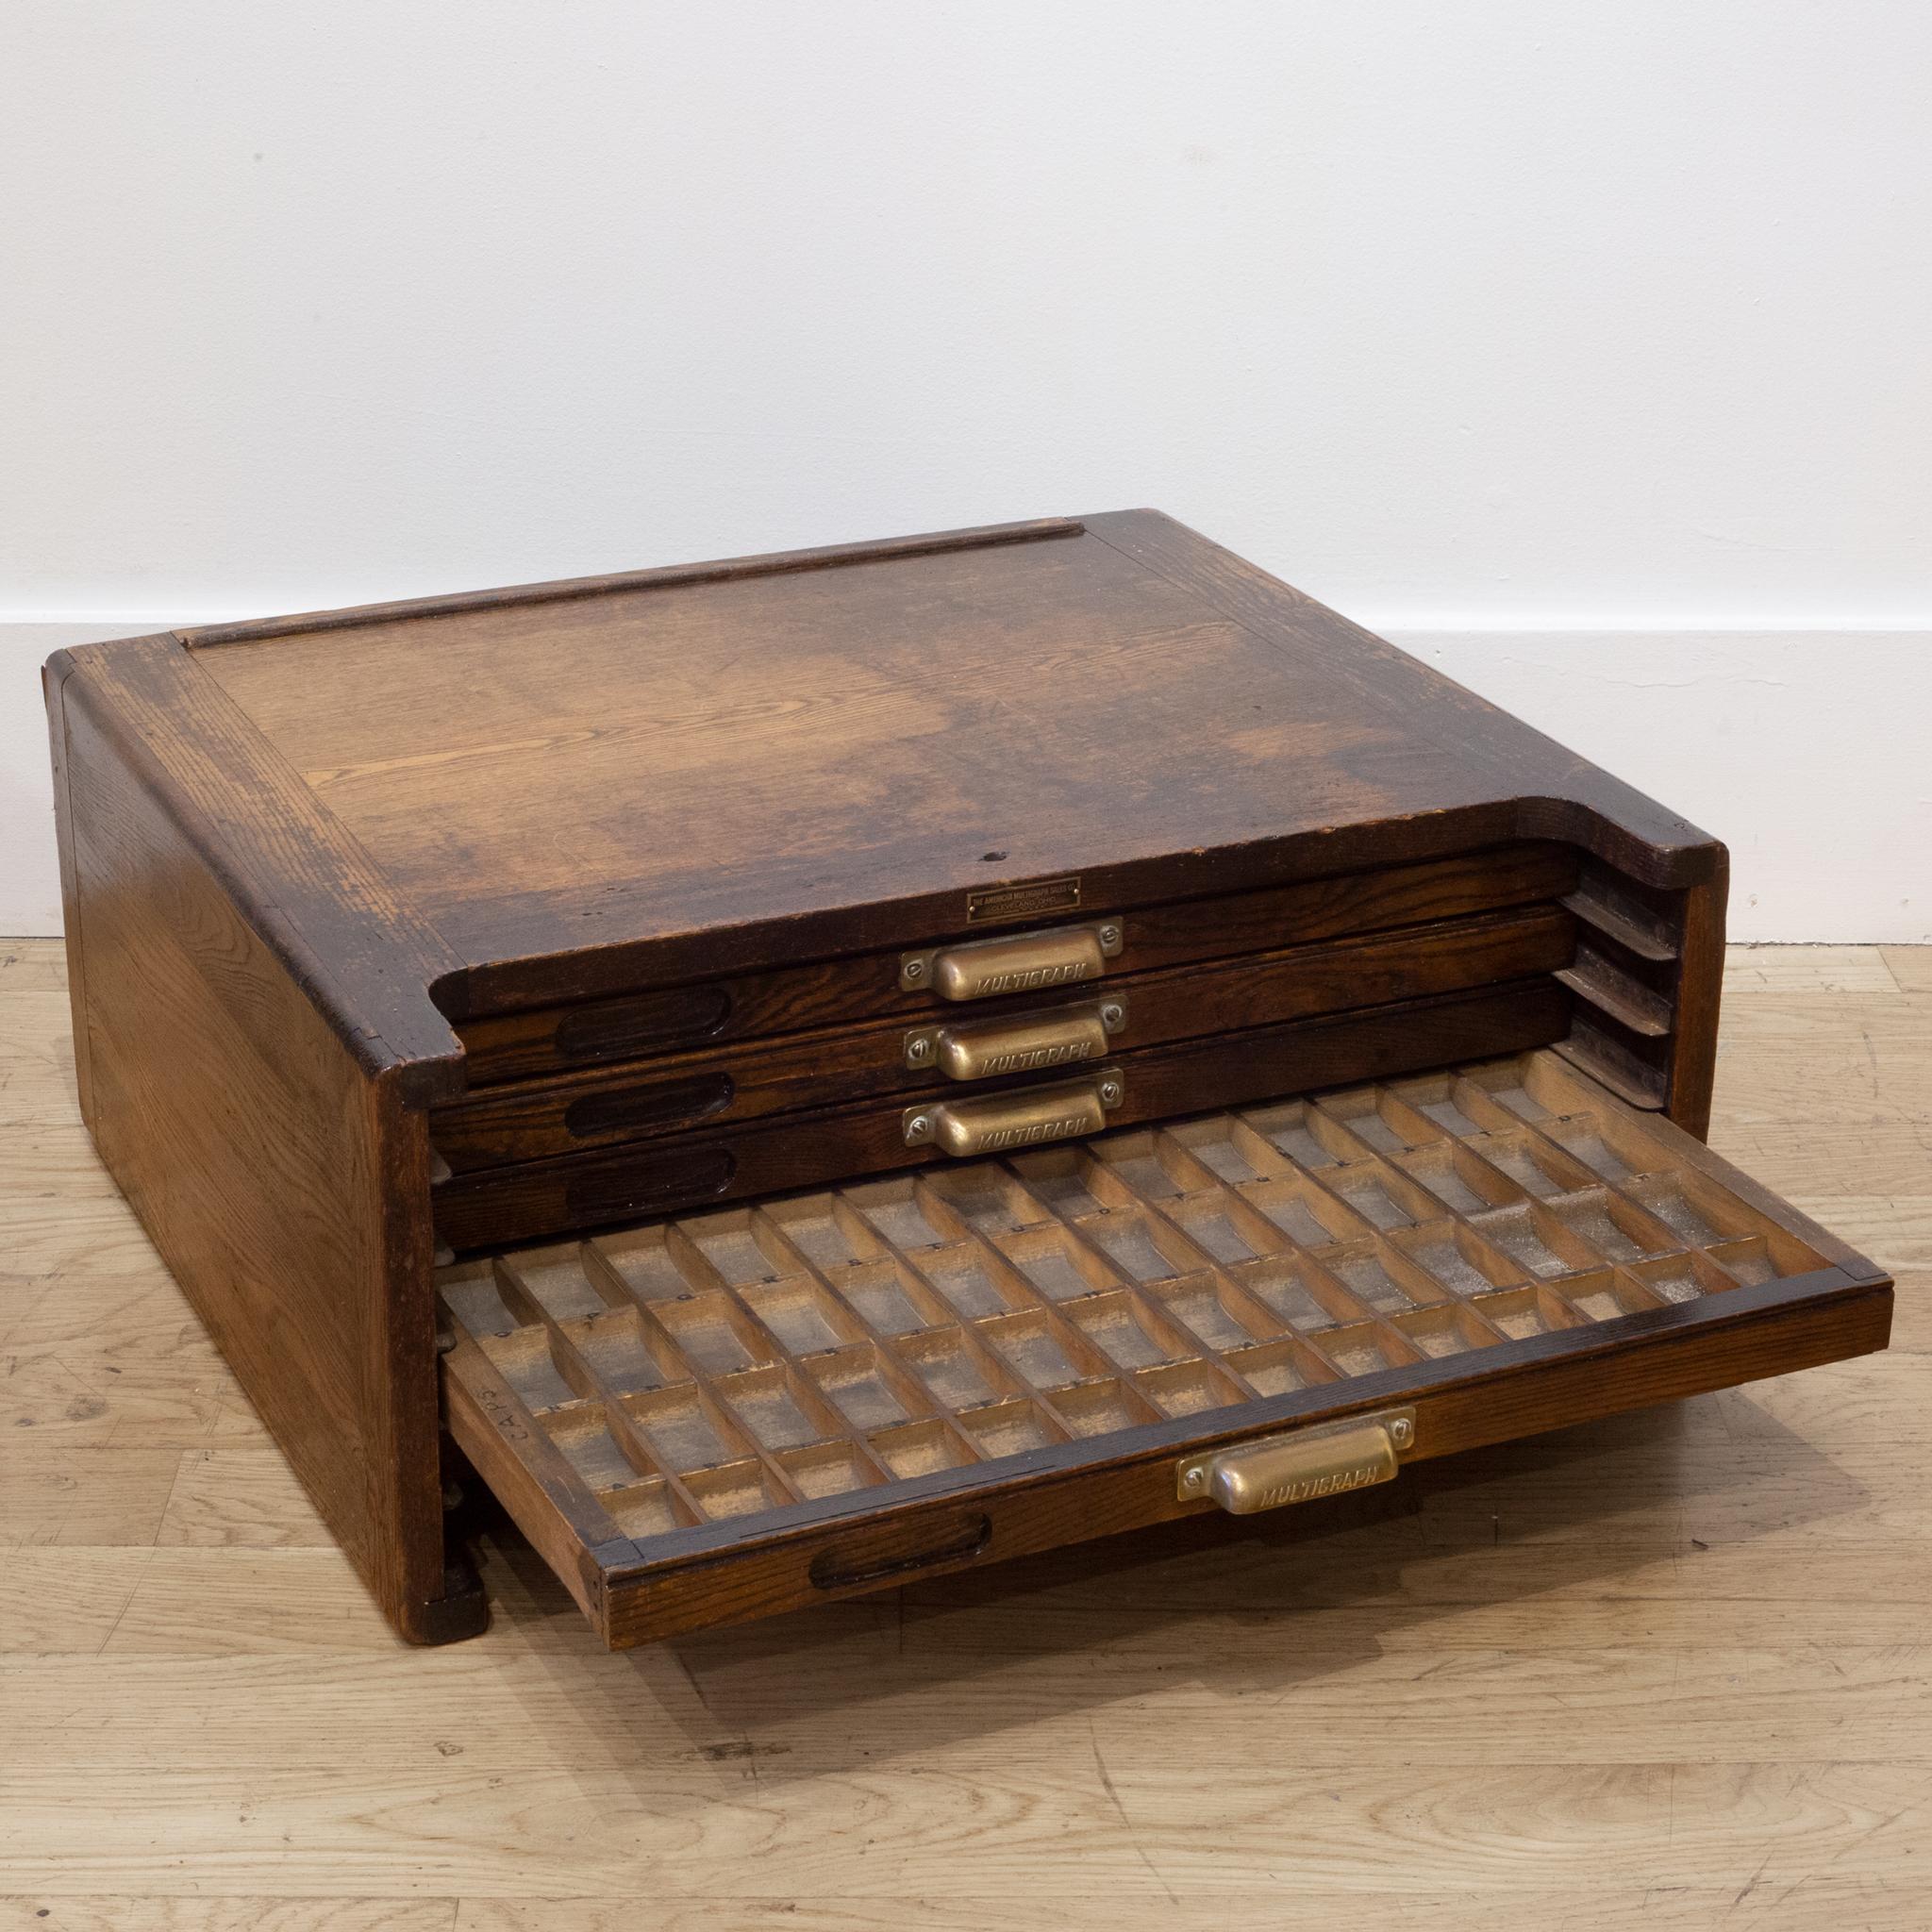 About

An early 20th century typesetter's table top cabinet with brass handles, original label and segmented drawers used to house steel typeset letters. The bottom of each space in the drawers is curved for better gripping. The piece is